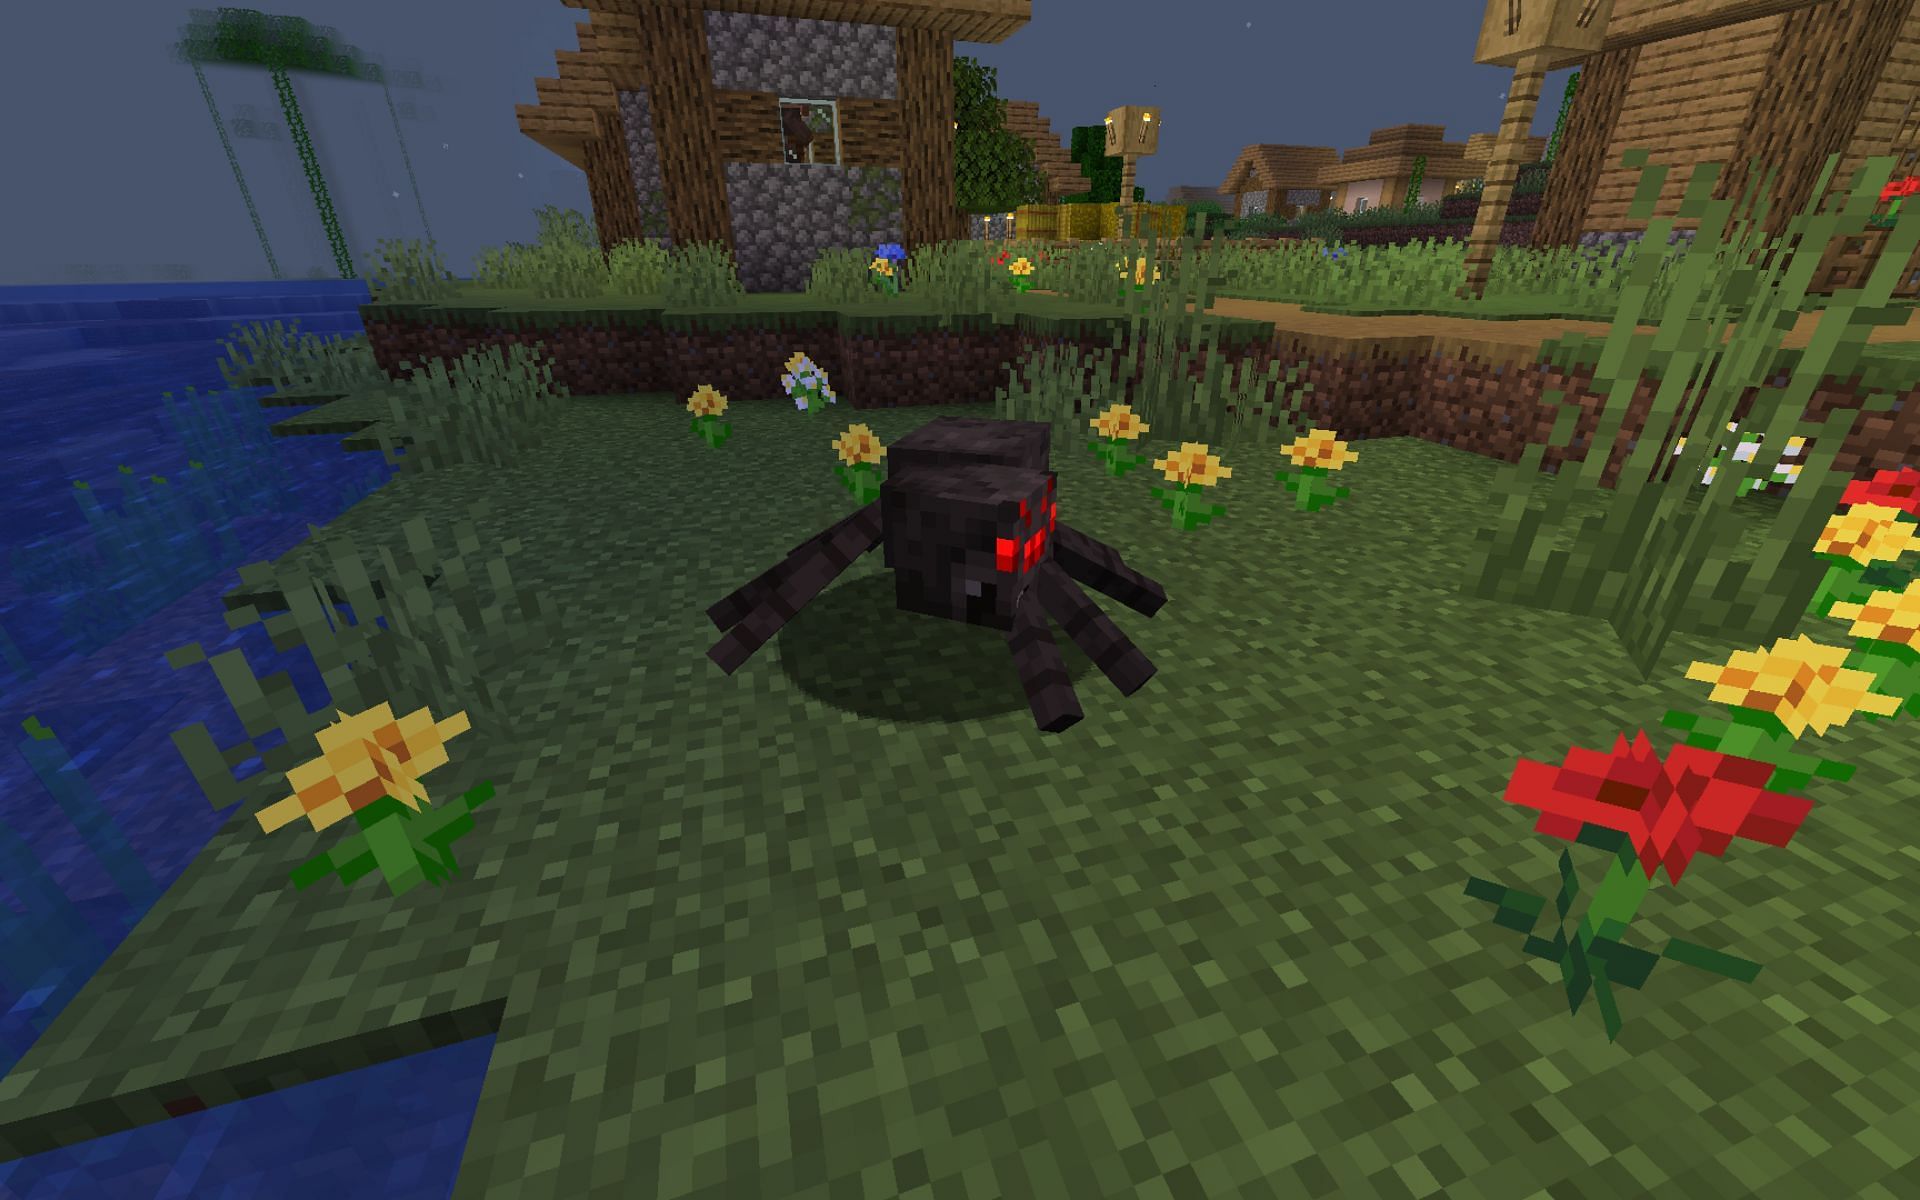 Spiders can climb almost any block in the game (Image via Minecraft 1.19 update)